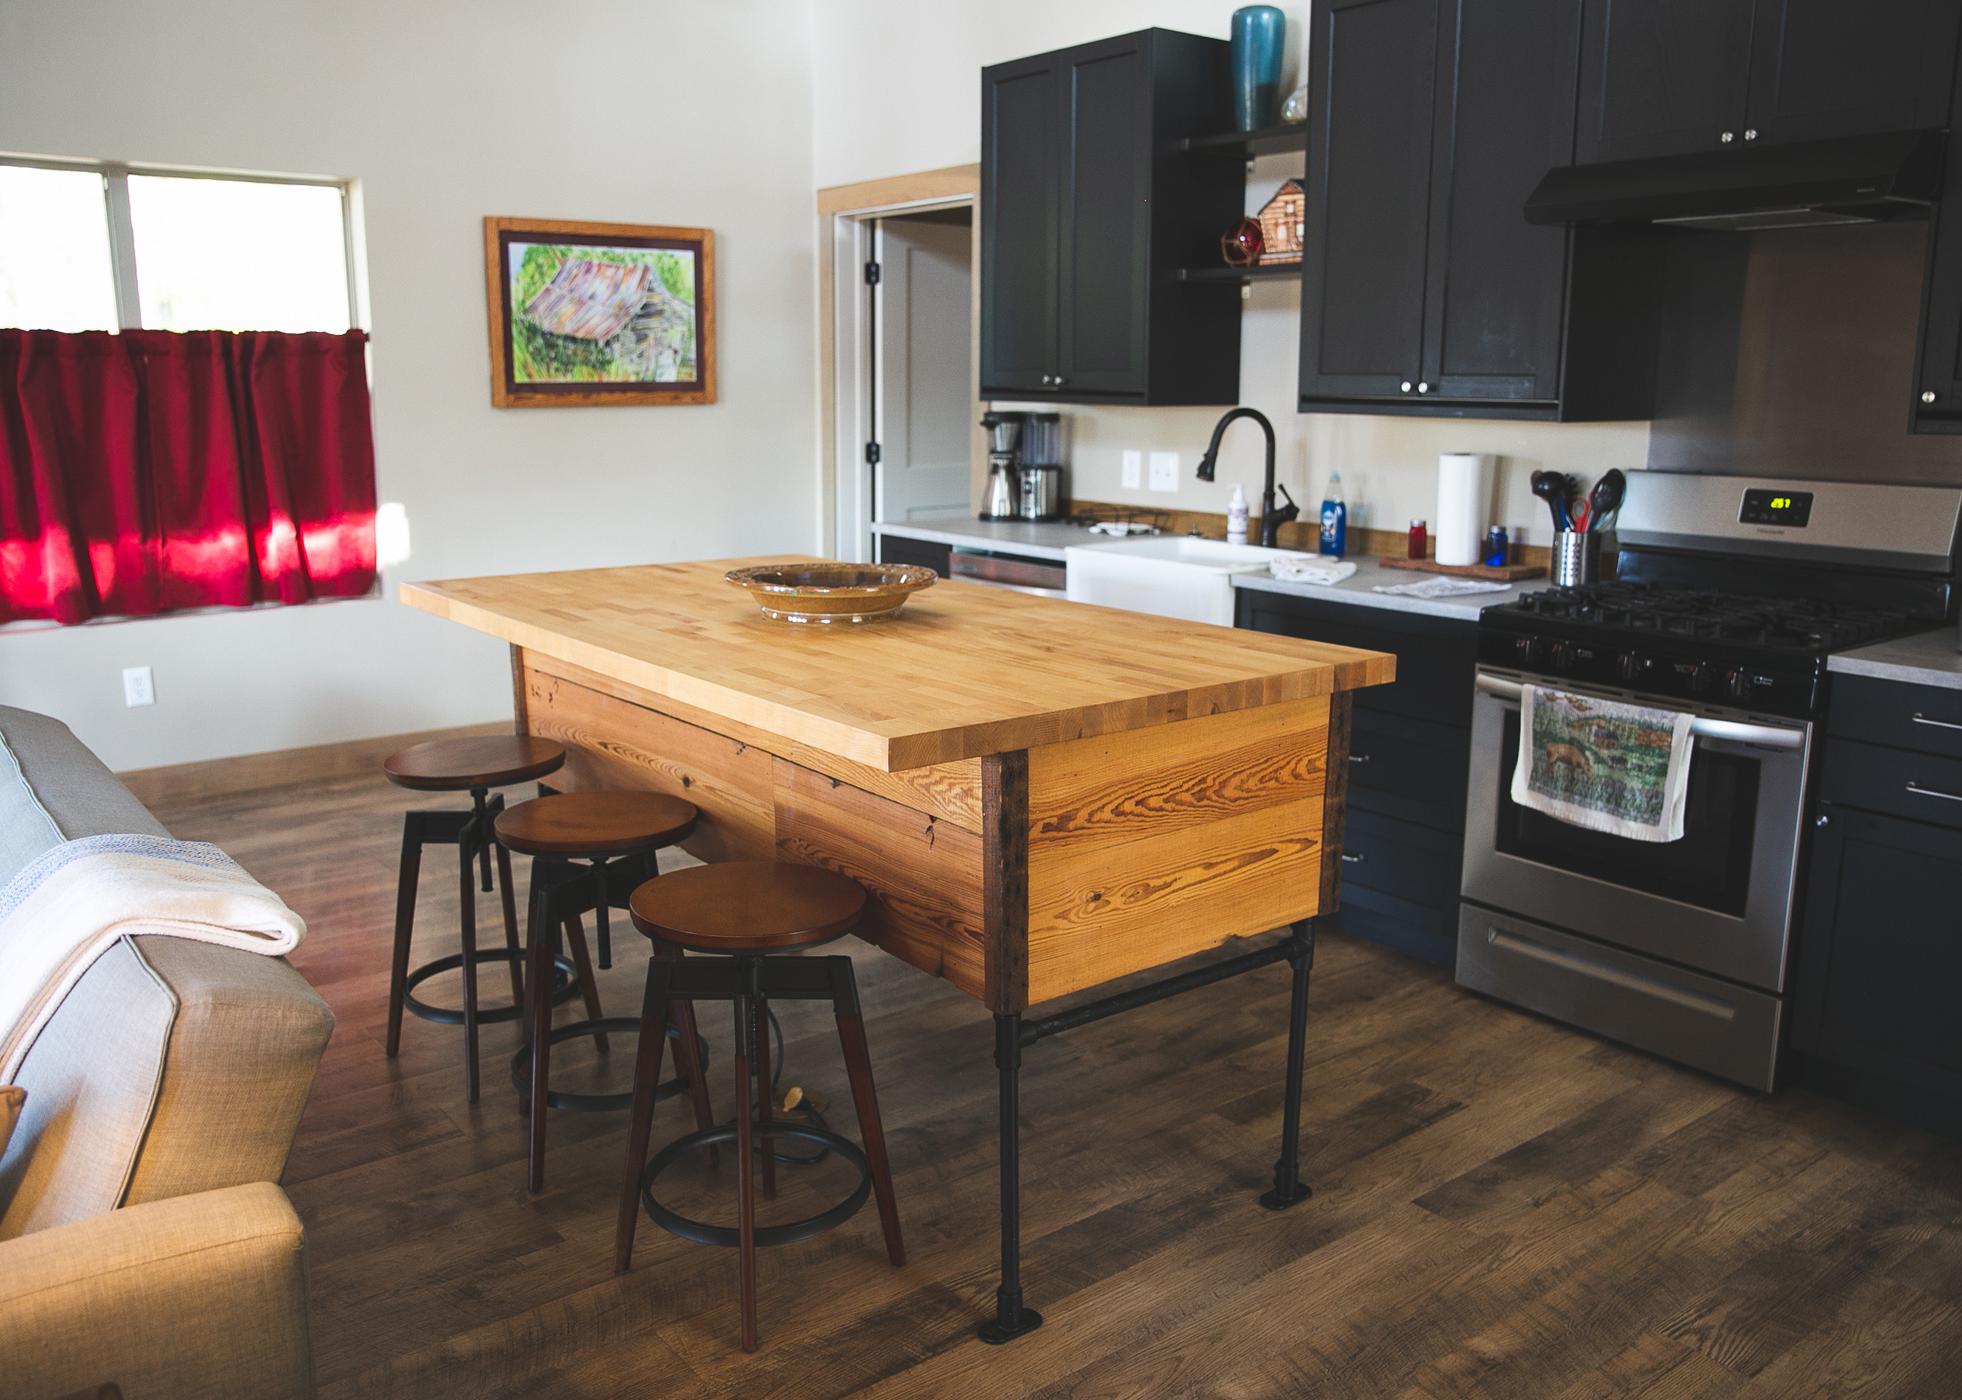 A serving island and three stools sit in a kitchen.